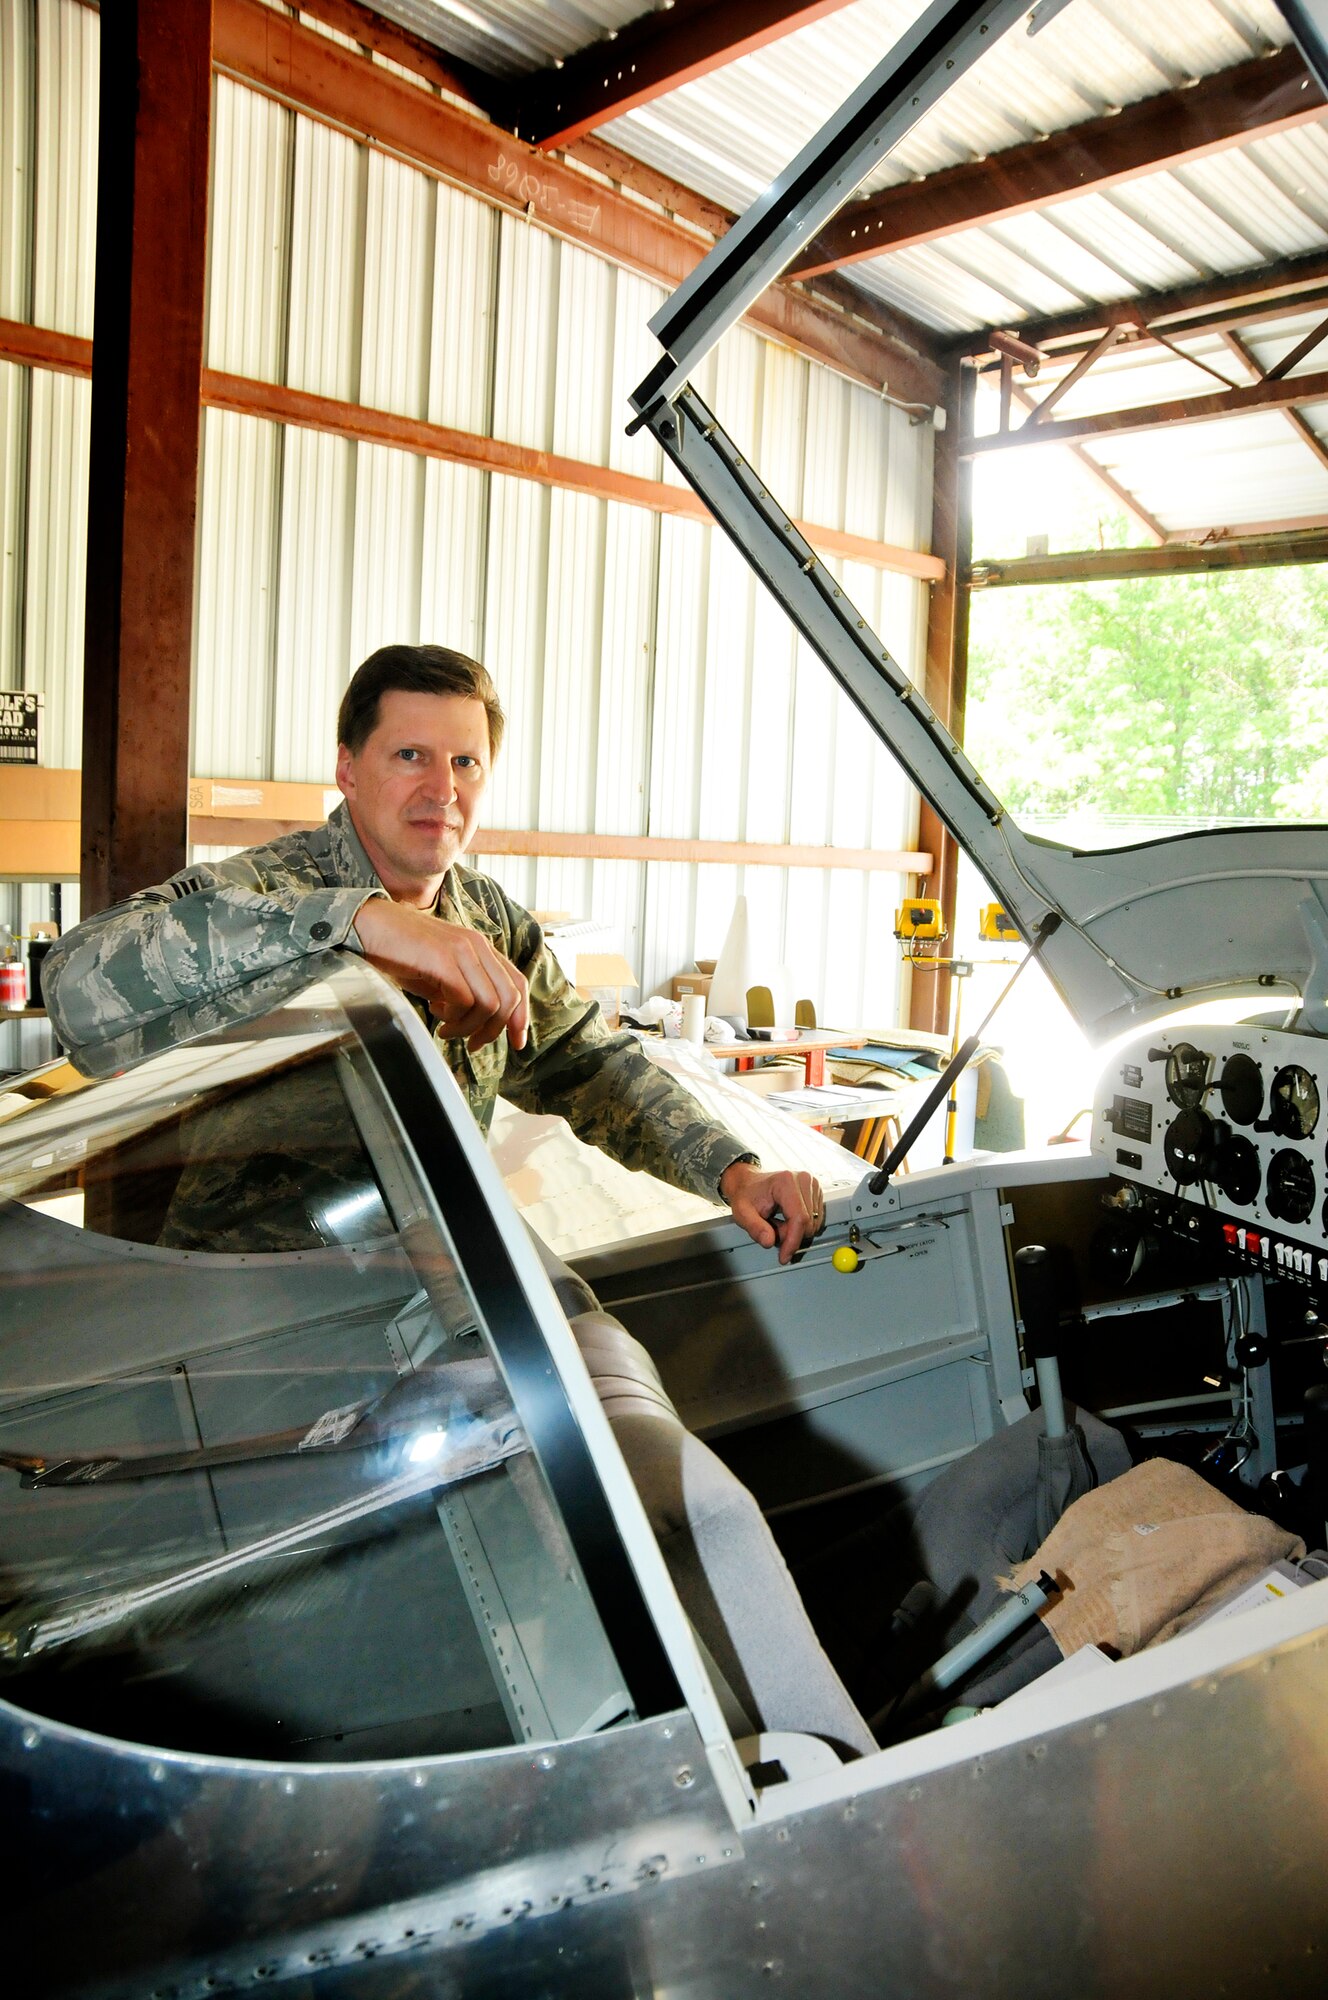 Chief Master Sgt. Jeff Trabold, 180th FW Airfield Operations Manager, pictured with his hand-built Vans Aircraft RV-6. The aircraft took around 22 years to complete and was funded with Chief Trabold’s guard checks. Photo by Staff Sgt. Nicholas Kuetemeyer, Public Affairs (Released).